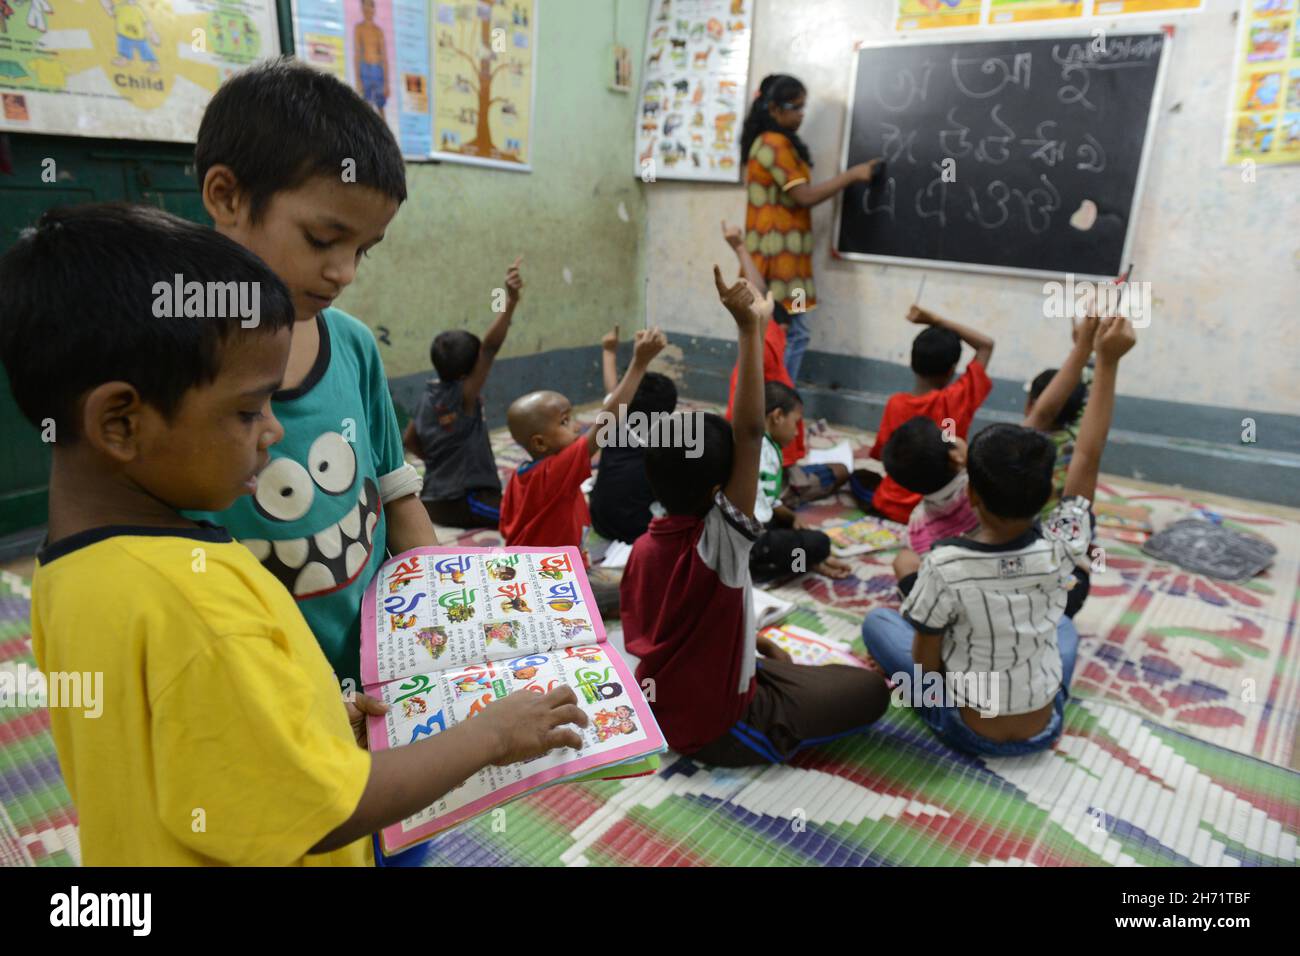 Classroom education, counselling support and first aid techniques provided to street kids. Kolkata, India. Stock Photo